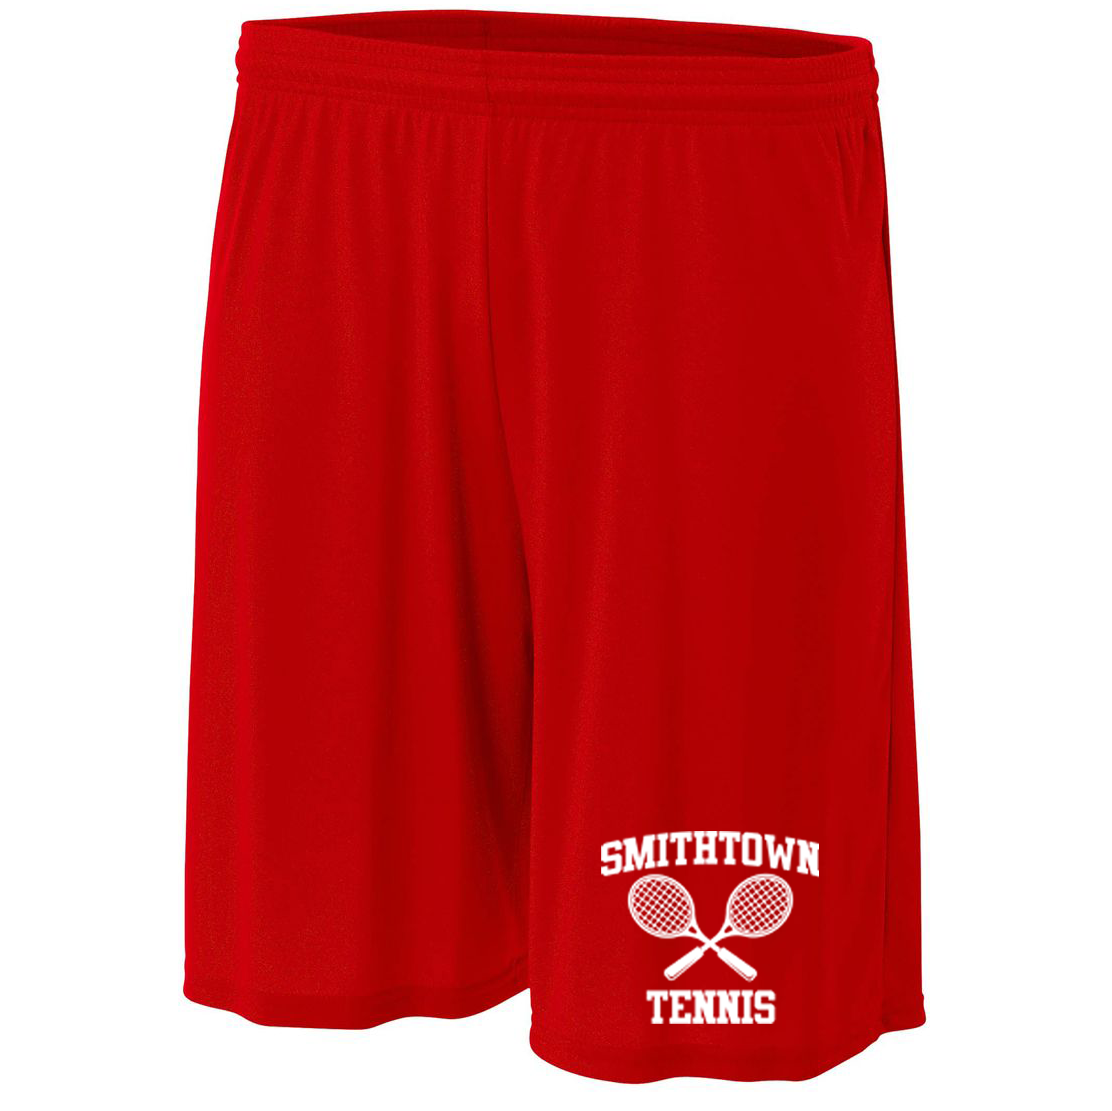 Smithtown Tennis Cooling 7" Performance Shorts